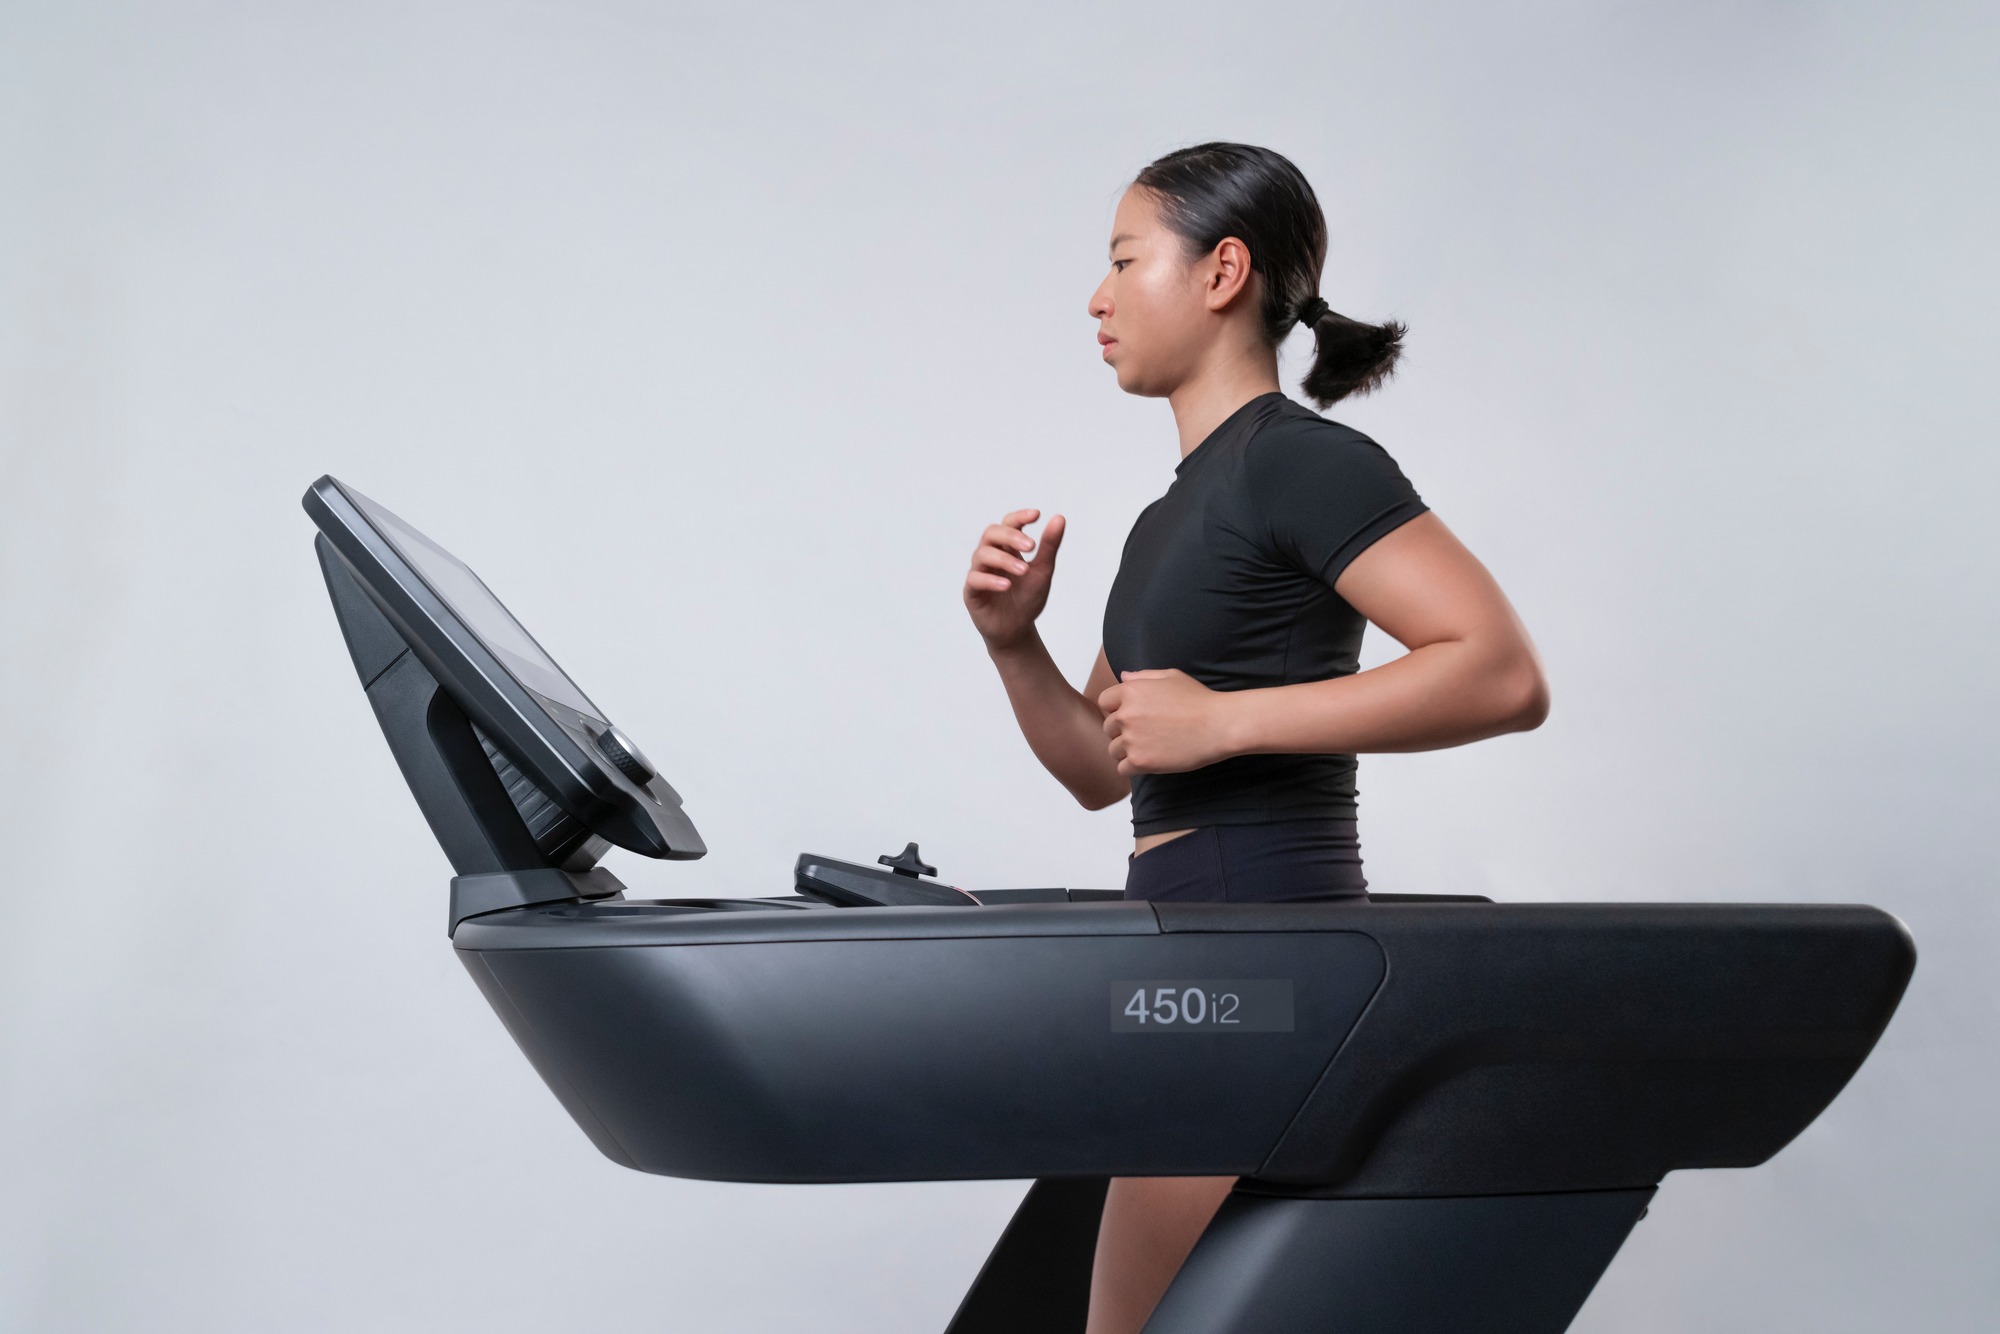 Best Budget Treadmill for Home Use